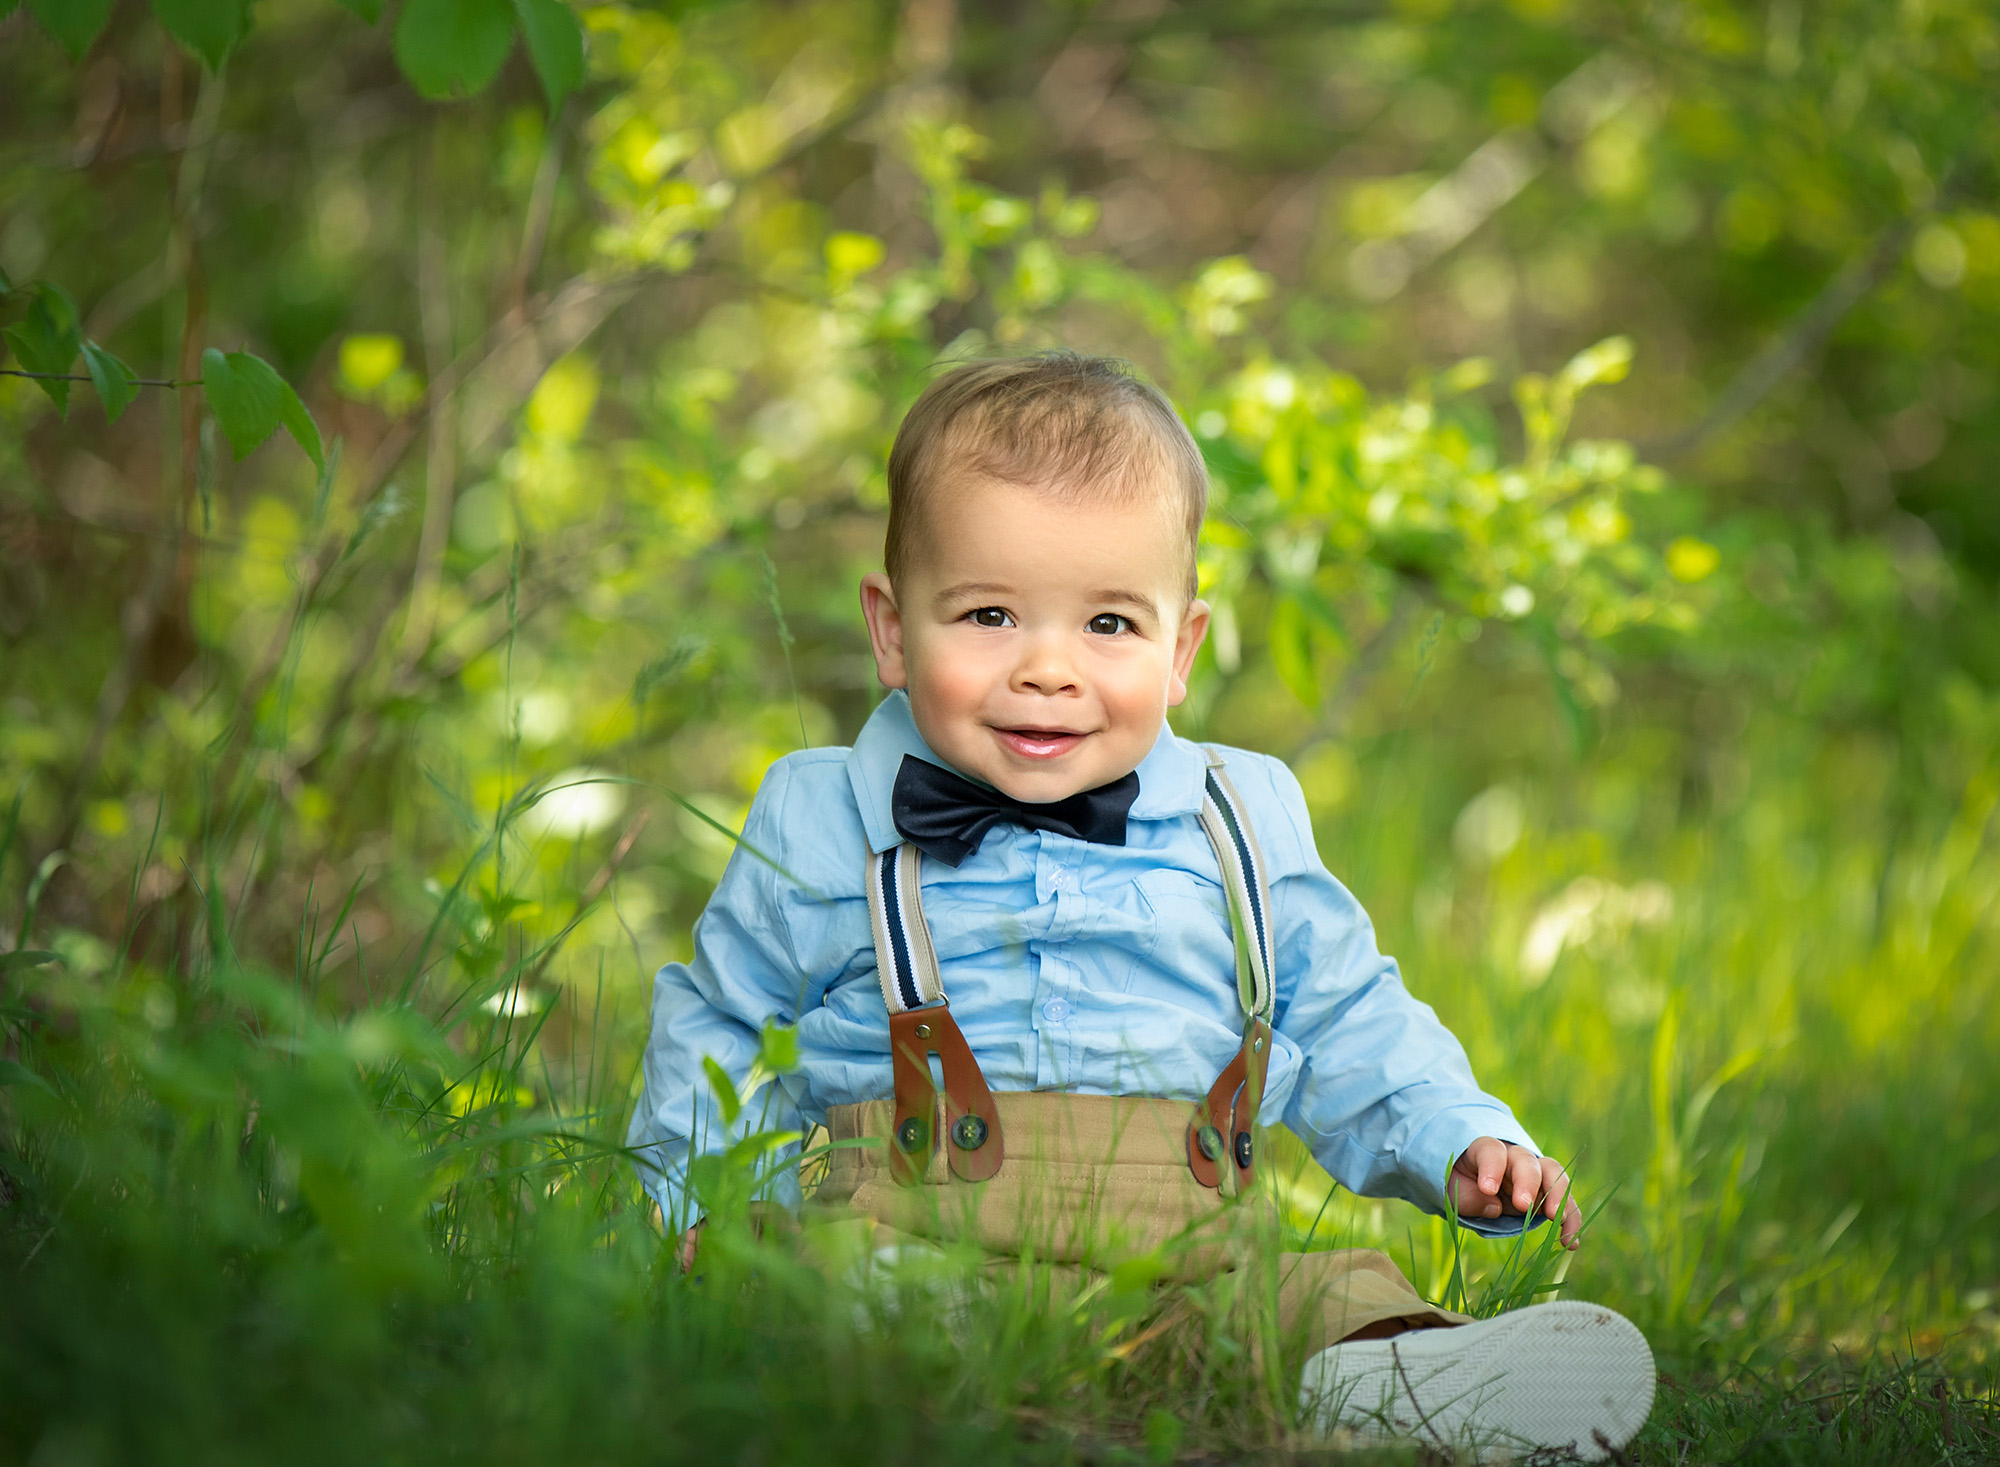 Summer Family Photos infant boy sitting on the grass smiling wearing a bow tie and suspenders